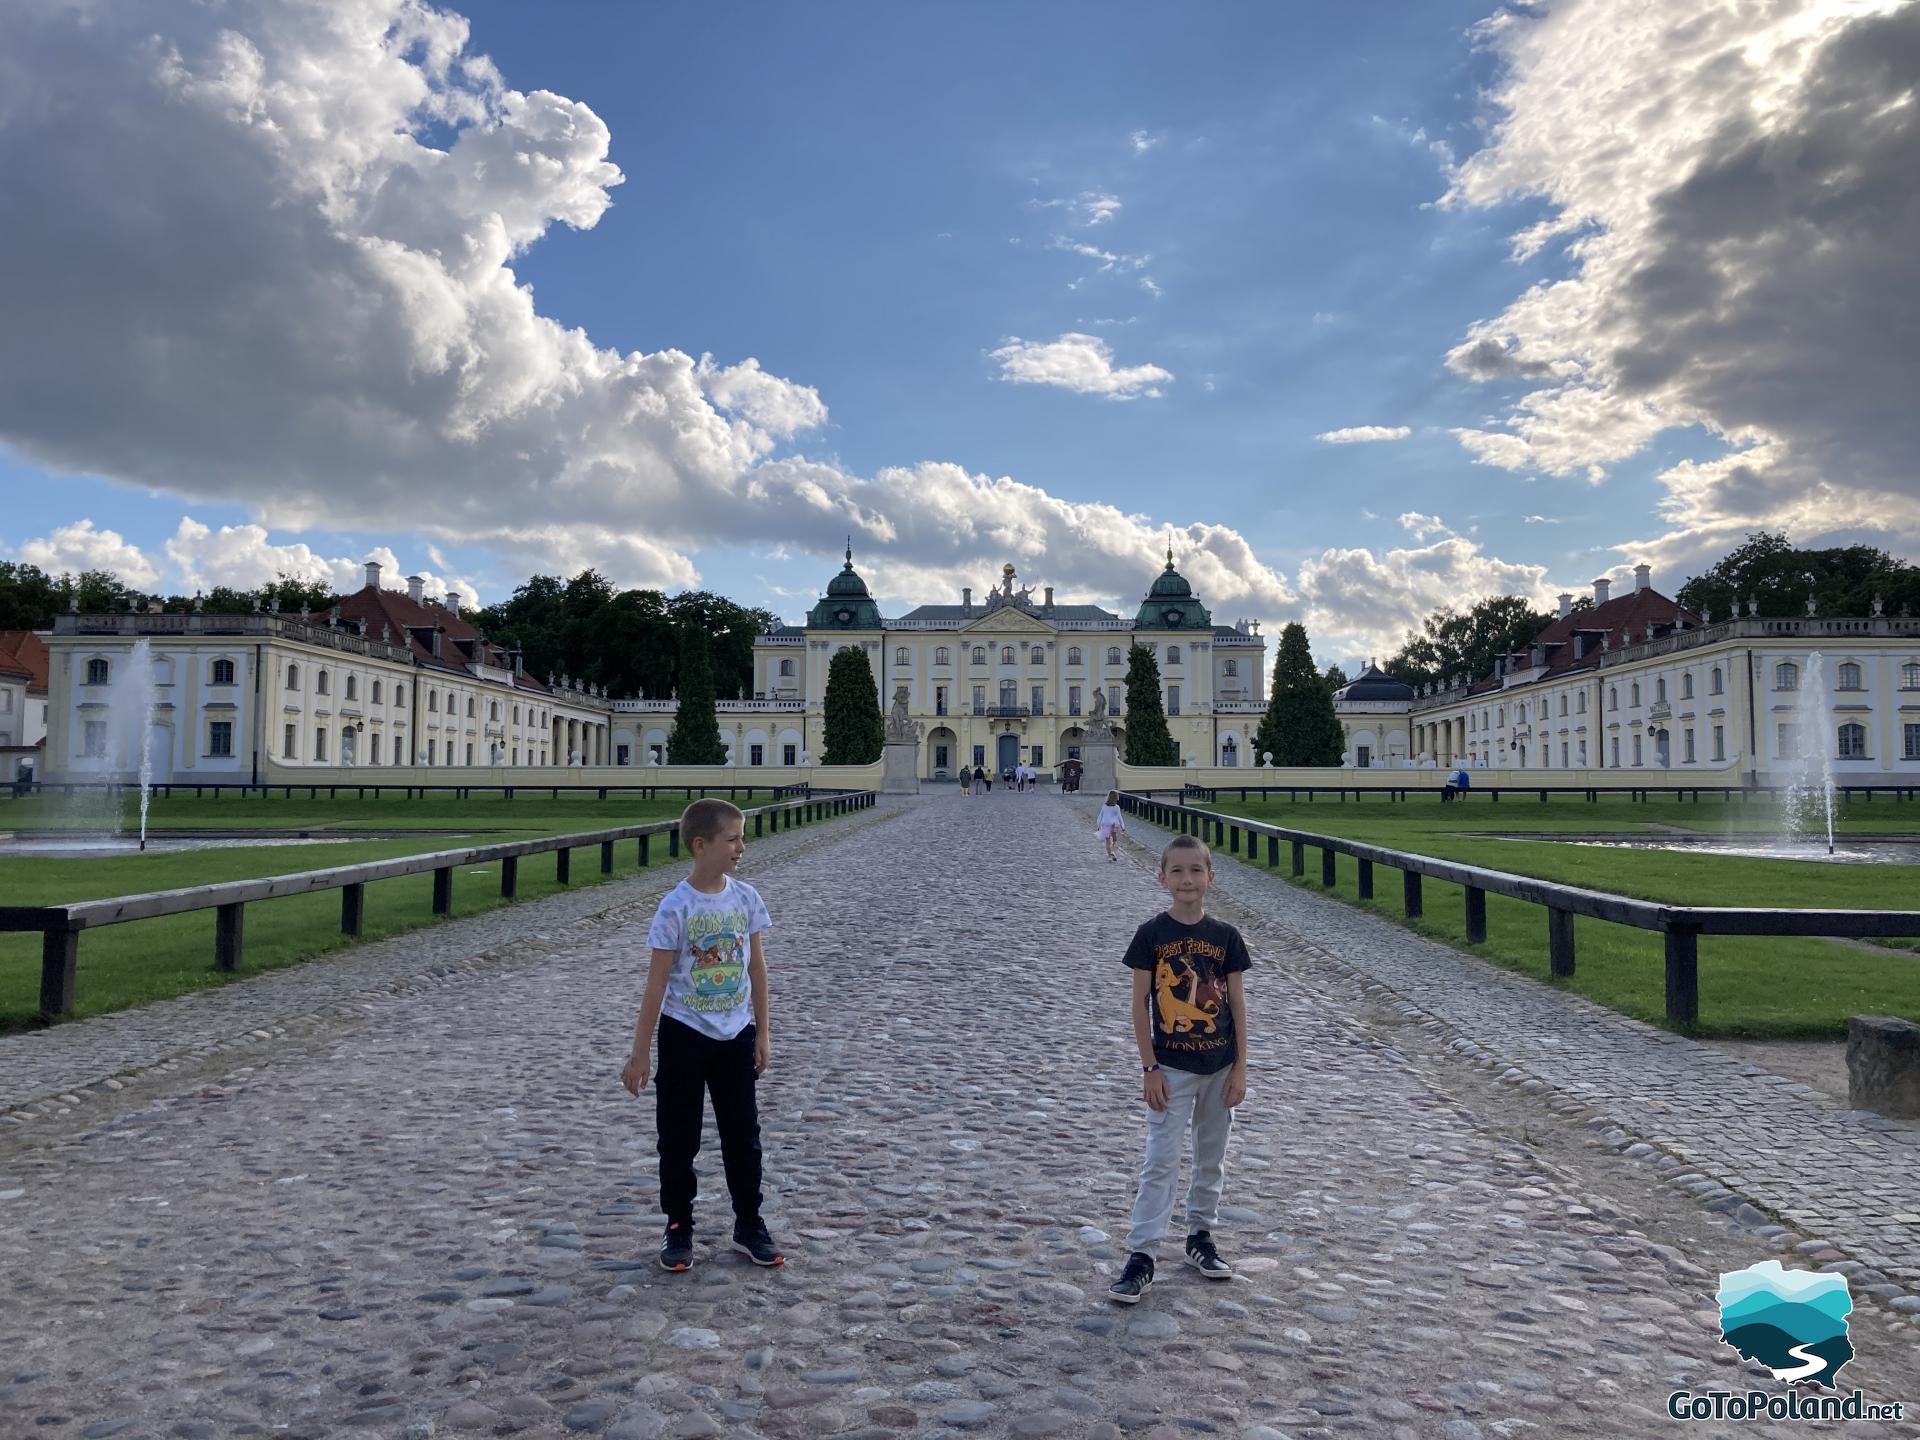 two boys are standing on the path leading to the palace which is in the background. The facade is yellow and white. In front of the palace, on both sides of it, there are two fountains.